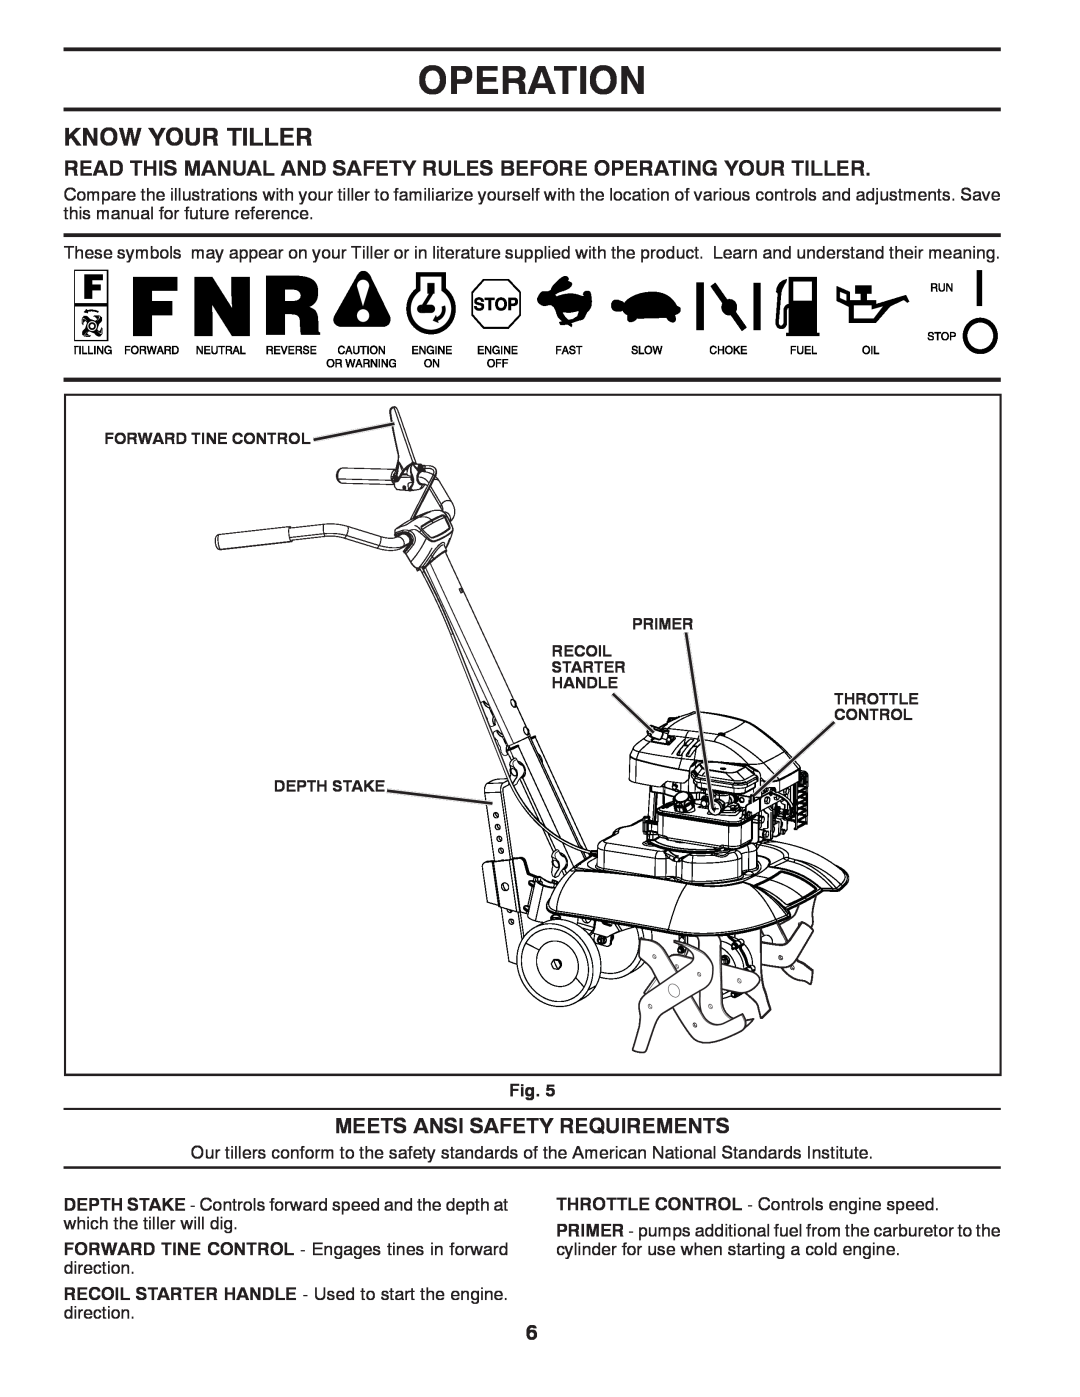 Poulan VF550, 96082001500 manual Operation, Know Your Tiller, Read This Manual And Safety Rules Before Operating Your Tiller 